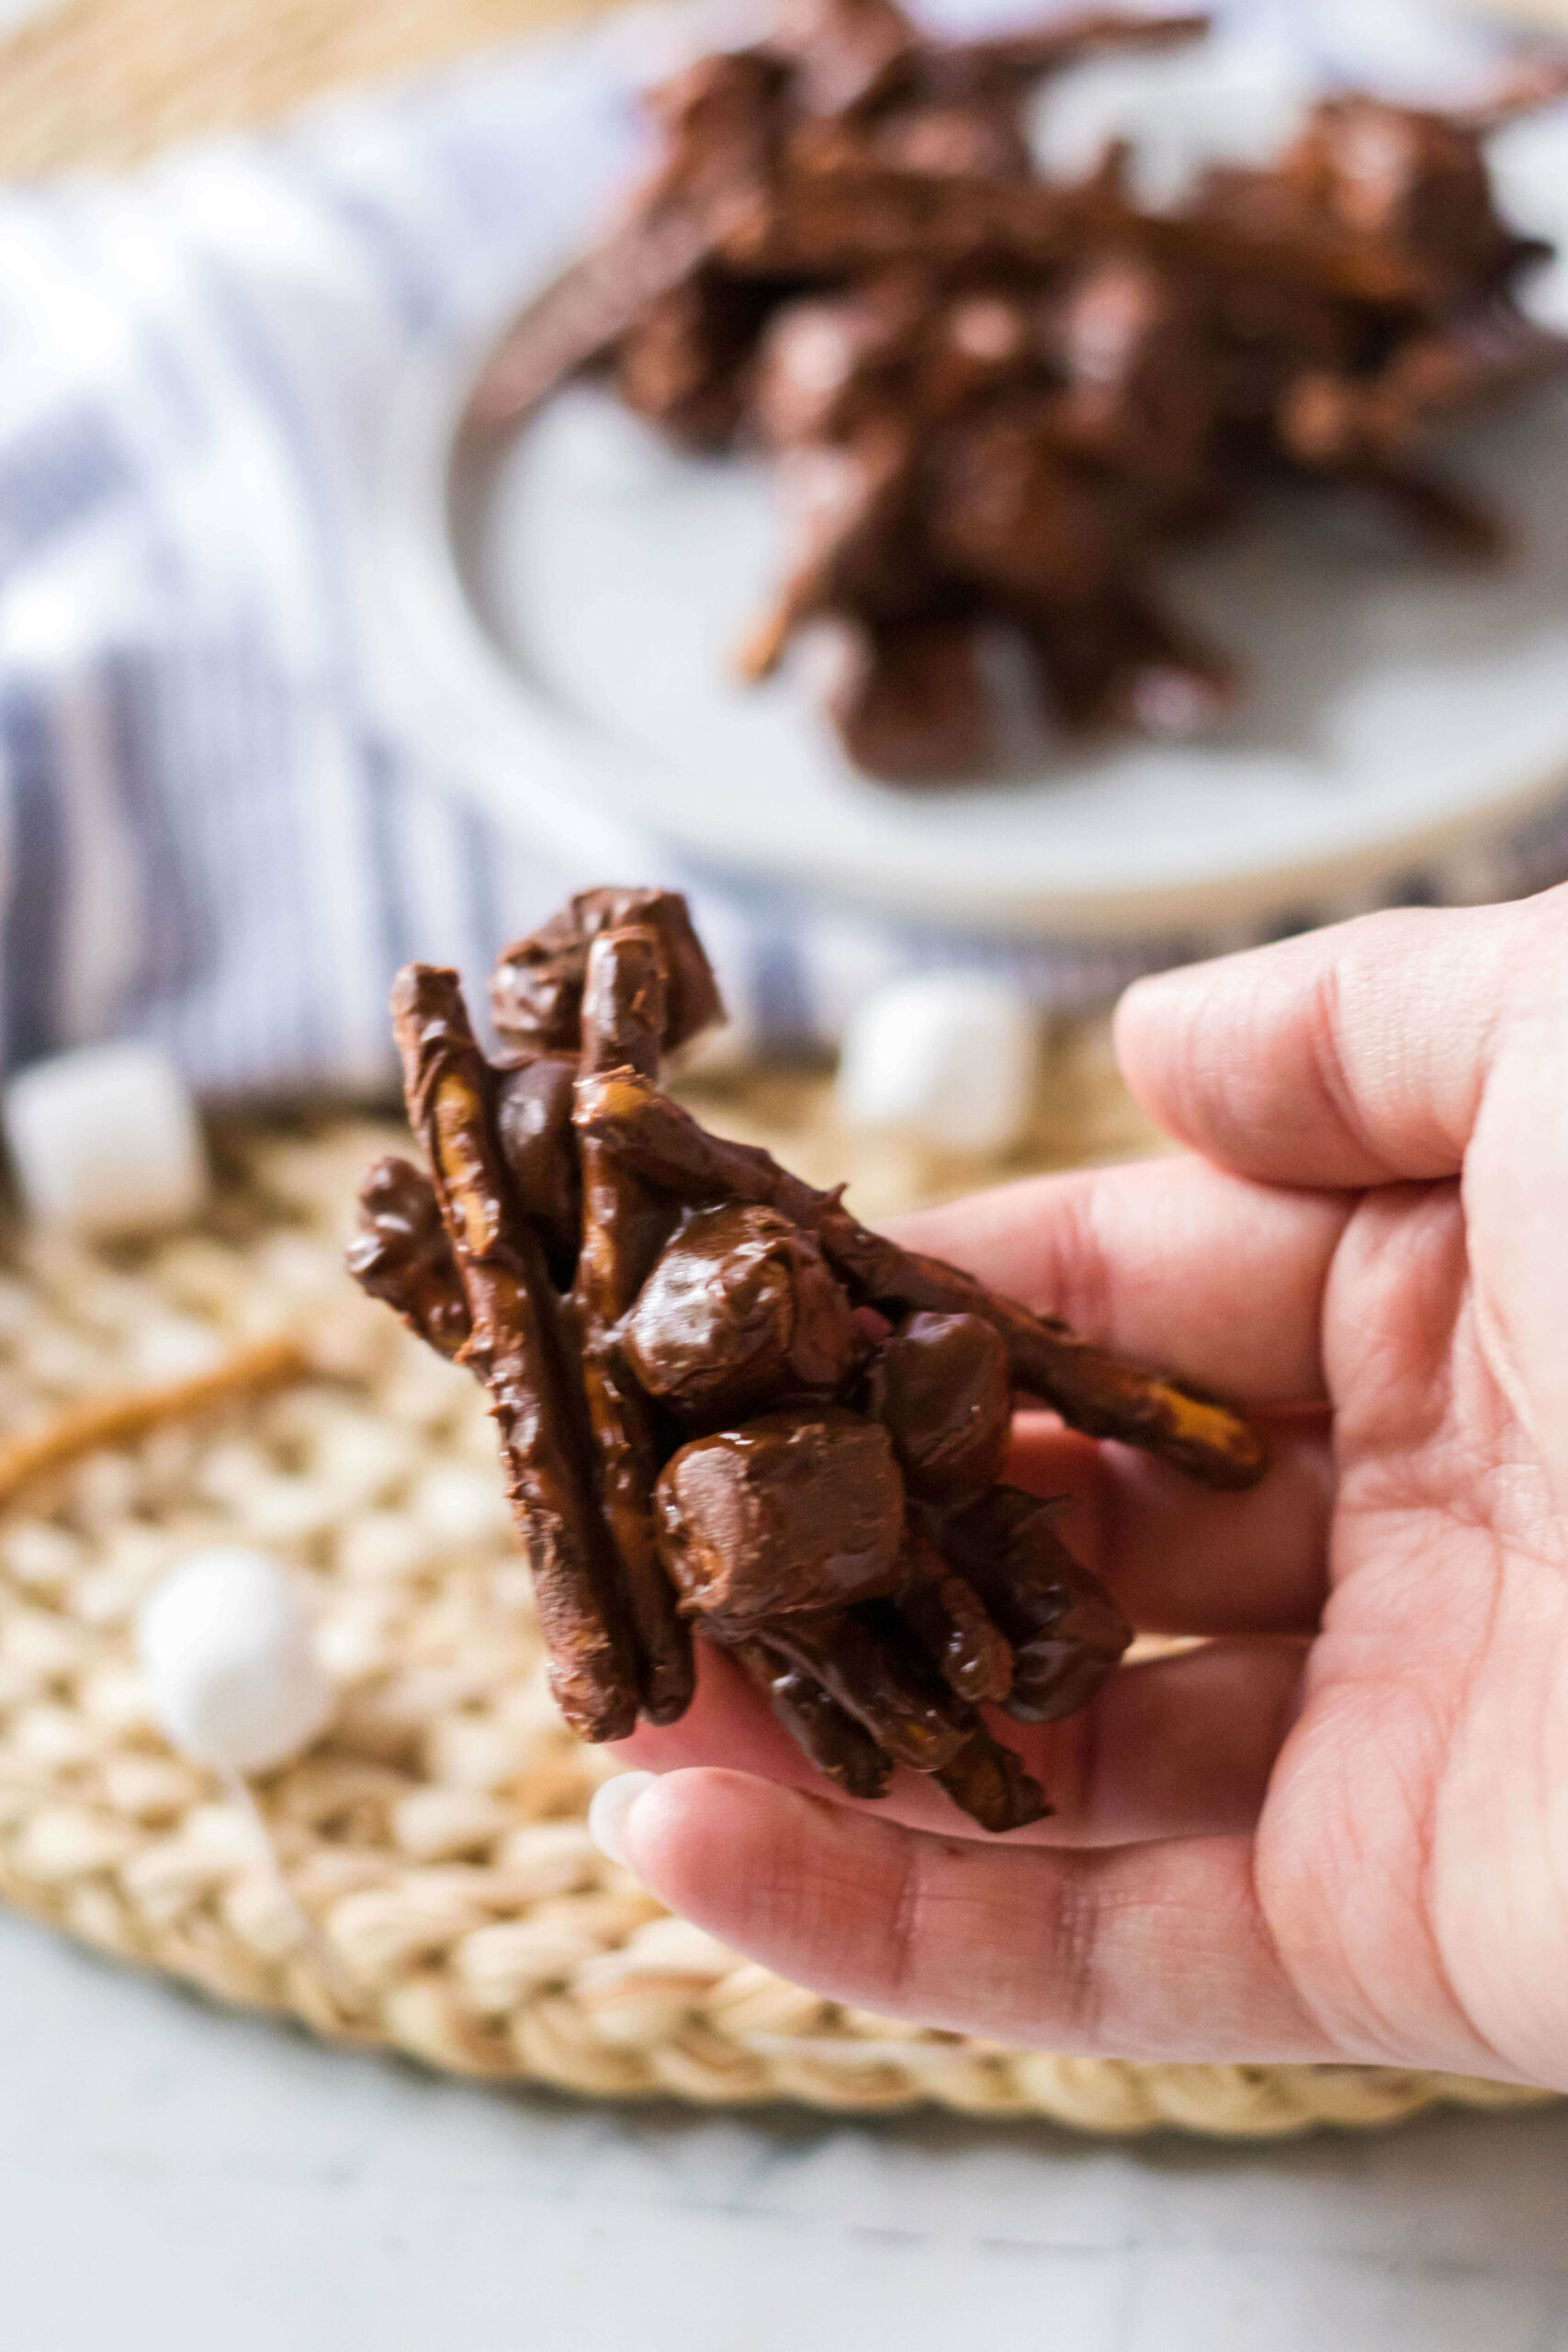 A hand holding the Chocolate Peanut Butter Haystacks.